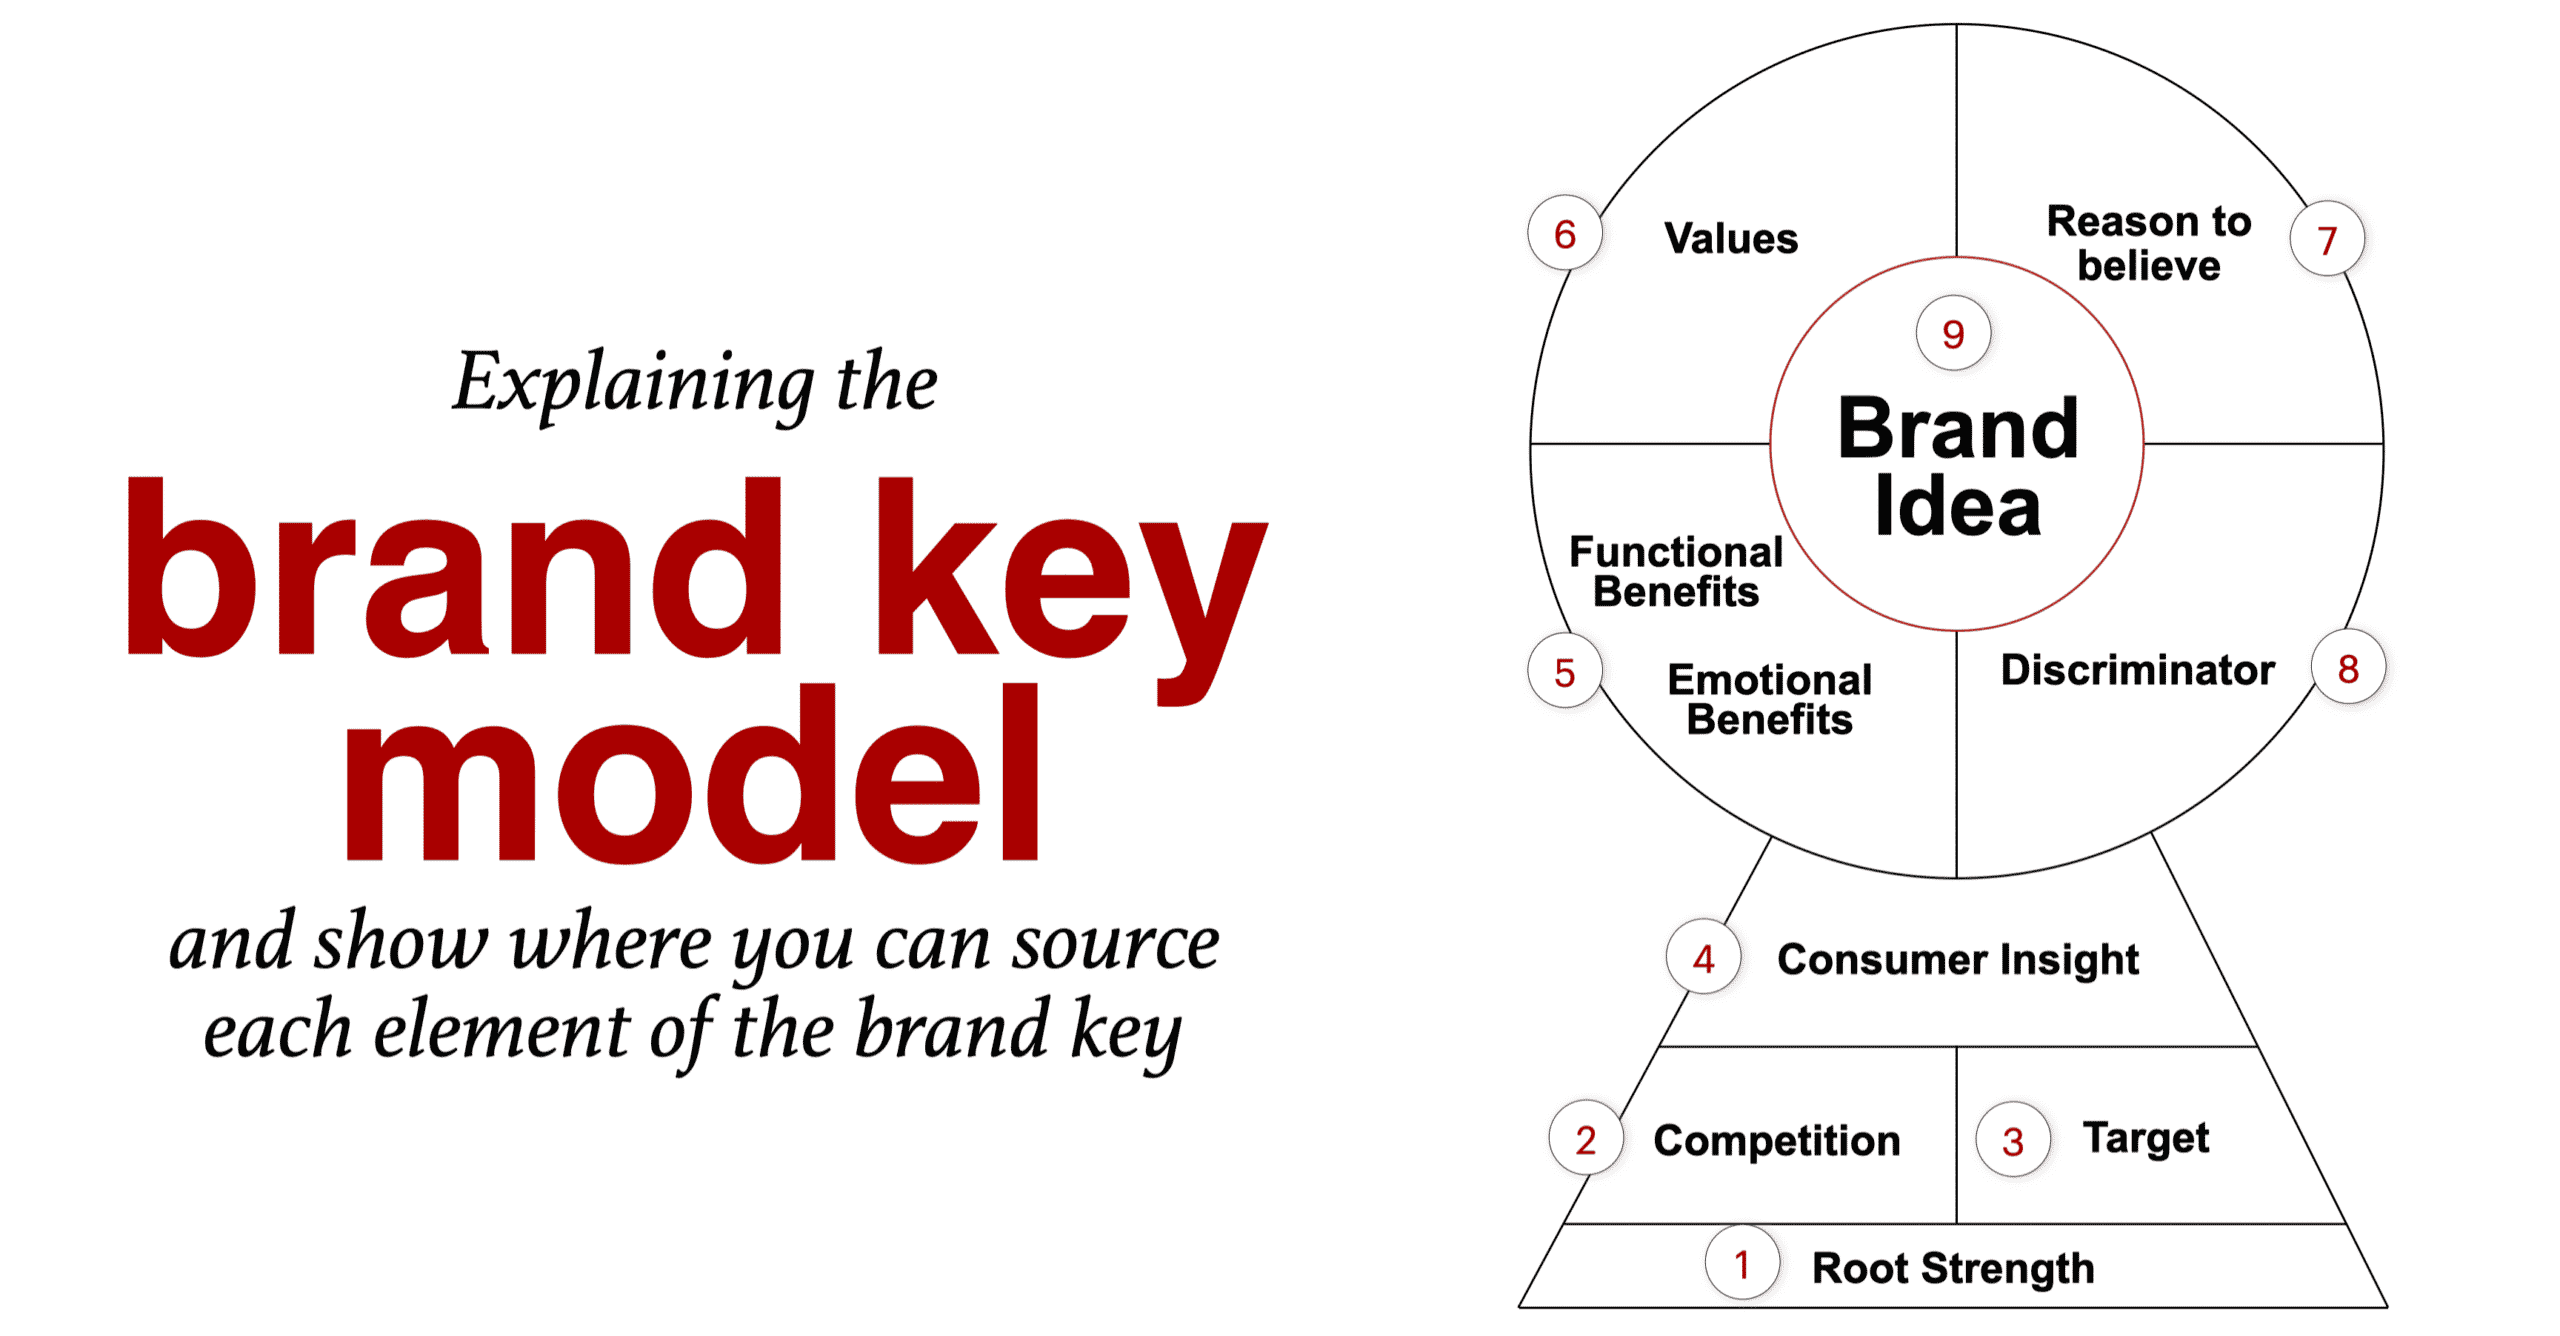 brand key model explained in detail for marketers and Unique selling proposition (USP)